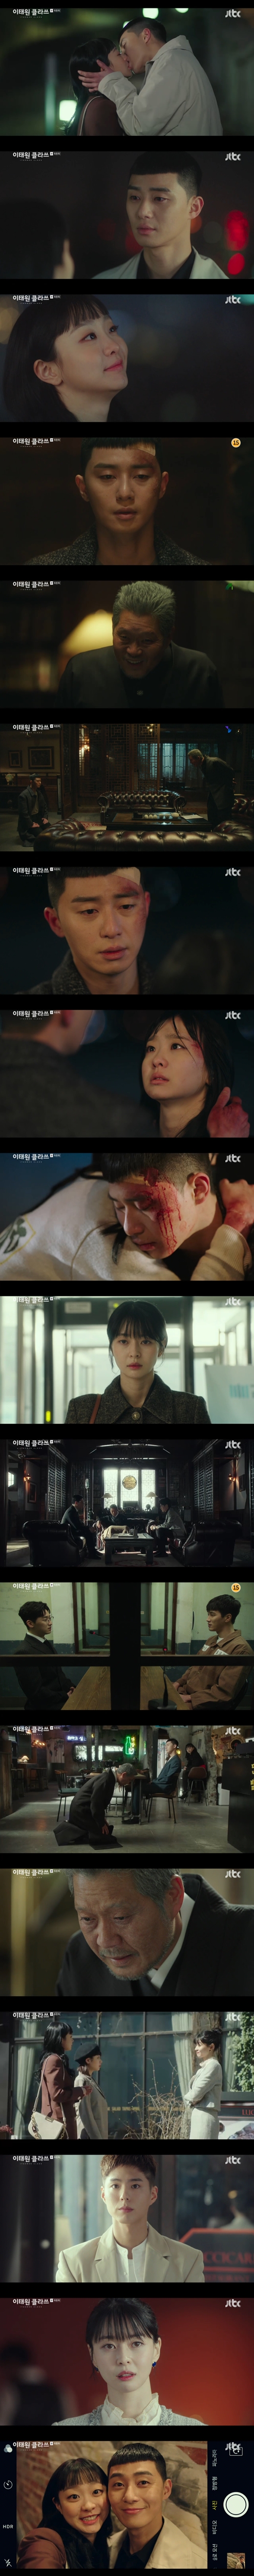 <p>21 broadcast JTBC gold store drama, Itaewon then write(Theatre default dimmer with directing Kim Sung Yoon) last meeting in vengeance and love all of the accomplished night to new this(Park Seo-joon)of the story were drawn.</p><p>After the car accident, waking up the night new, and screwed in(Kim Dae-mi)for a sick body caused. Long-Hee(Yoo Jae name)devices source(security)is caught and this tells the location of that requested and, night new that without hesitation to his knees.</p><p>Zhang Ye smile the moment, Night new mouth opened. He said, now for revenge, as the area came alive. Long shall that man my life hell, driving time, the enemies at the same time, a great man. I Your Back to chase life over him. Until now, this fight is worth it all. Such a man is a hostage in the knees as well this ugly old man to catch up to the time that I was inviting. Ten years from now you know you didday to day him. Pole our vanity look.</p><p>Presently, and in fall moment, in front of it night new, and the best lift ticket(kind of water)appeared. Night new, and the best lift ticket Jang Geun Park, Kim Hee Hoon(original expression level)and fought and eventually joy in your success. Night new that finally Joey in love confessed.</p><p>This old dog(the right one)of the bit width as the device is collapsed said. Night new of the IC Group is collapsed the device is acquired in order to moved, the pole we are to prevent this night into the fortress to find him. Sincere apology to me. Was wrong I said,kneel tears shed pole our. However, Night new that my needs do you see? That shopkeeper is. Acquisitions in the lost and I am behind that and what is it worth it? The business now. Presidentand accepted his. So the night into the fortress of the IC device is to be acquired. Perfect for a plurality of finishing was.</p><p>And the event finish since the people in the story of the turn introduction was. Night new this towards the Mind information about the sewage to find a restaurant with a new life began. The restaurant is handsome chef(Park Bo-gum)has joined.</p><p>Thumb seemed, not seemed strange relationship this is the best lift ticket and Express(a)of this story is still ongoing was. Also the Itaewon streets as a background to enjoy Dating night new, the Joey in the guise of a drama with that put.</p><p>Itaewon then writingis irrational World night new, this including the young people of the hipone rebellion through invigorating and exhilarating catharsis to the viewers of Love came to accept. Through the drama Park Seo-joon is looking more and more drama The King of the side to was and Kim Dae-mi, Lee Ju-Young, Kwon or, Kim Dong-hee, Ryu, water, security etc in theatre the new face of their presence was shown. Work both inside and out or that Happy Endings was.</p>